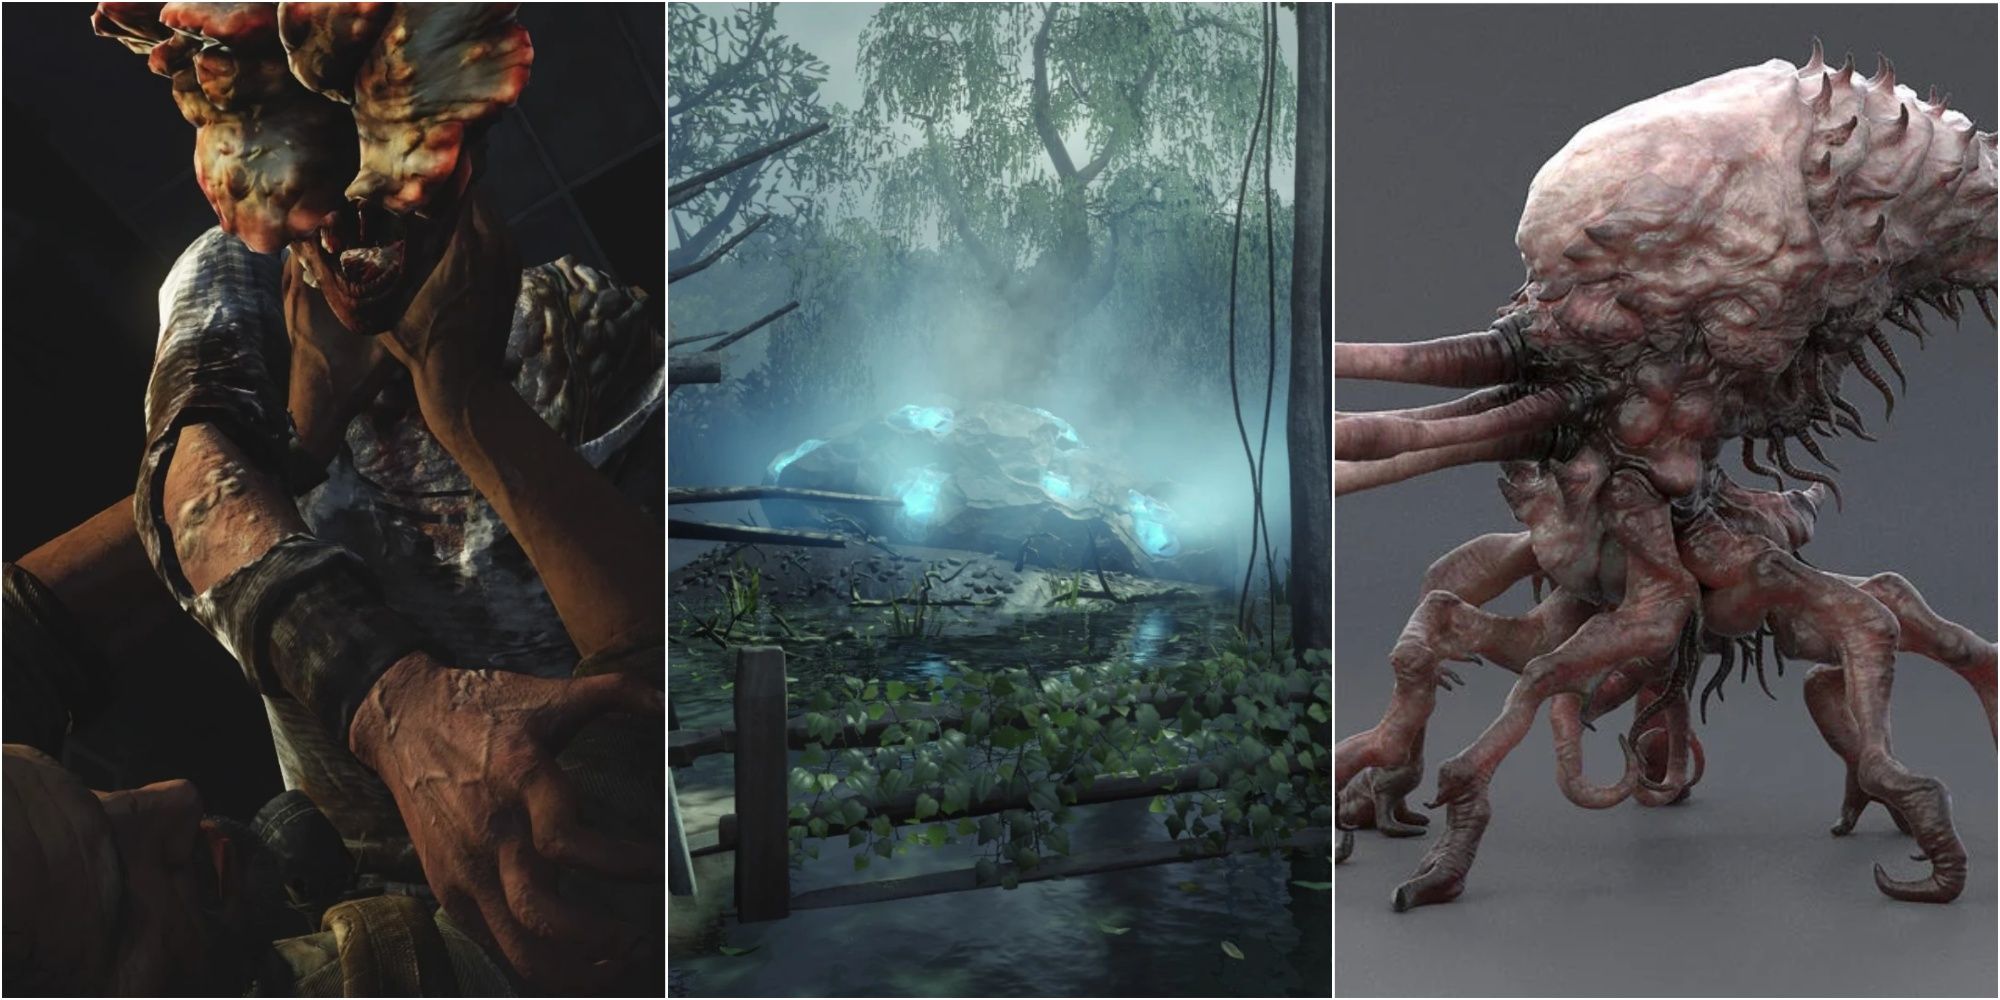 Clickers from the last of us. 115 Meteor from Call of Duty Zombies. Flood from Halo. 